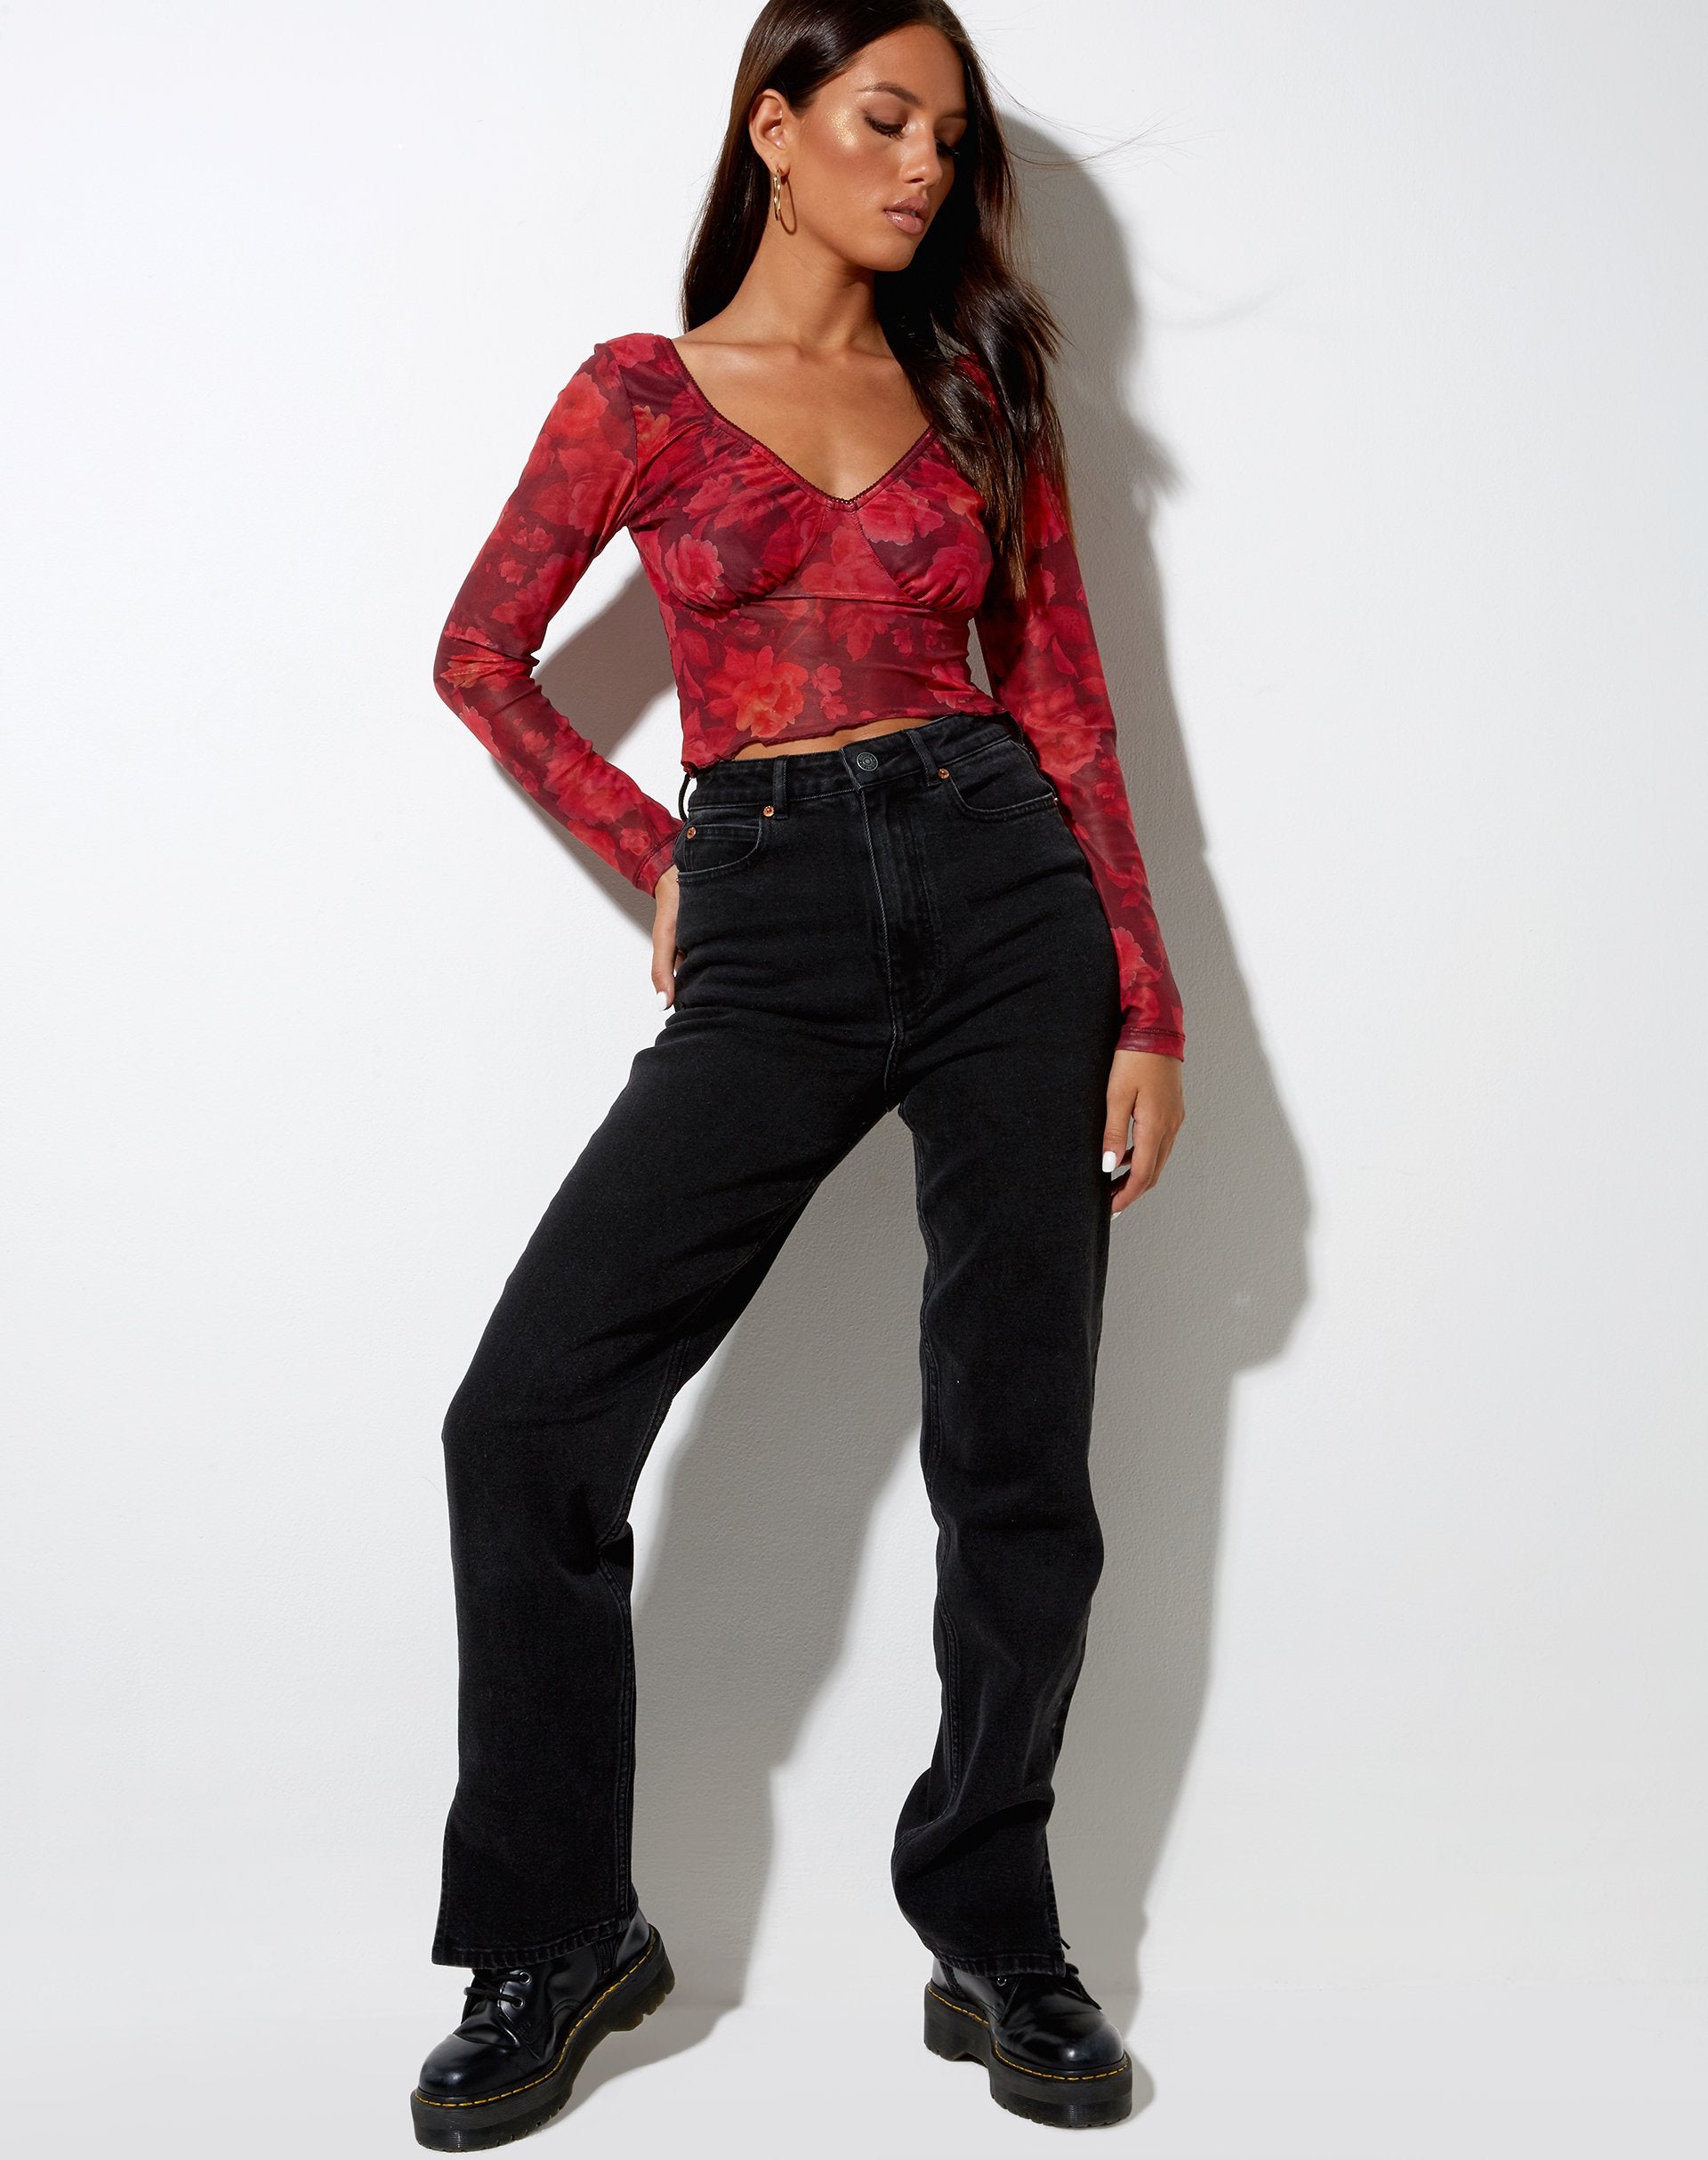 Image of Glaster Crop Top in Rough Rose